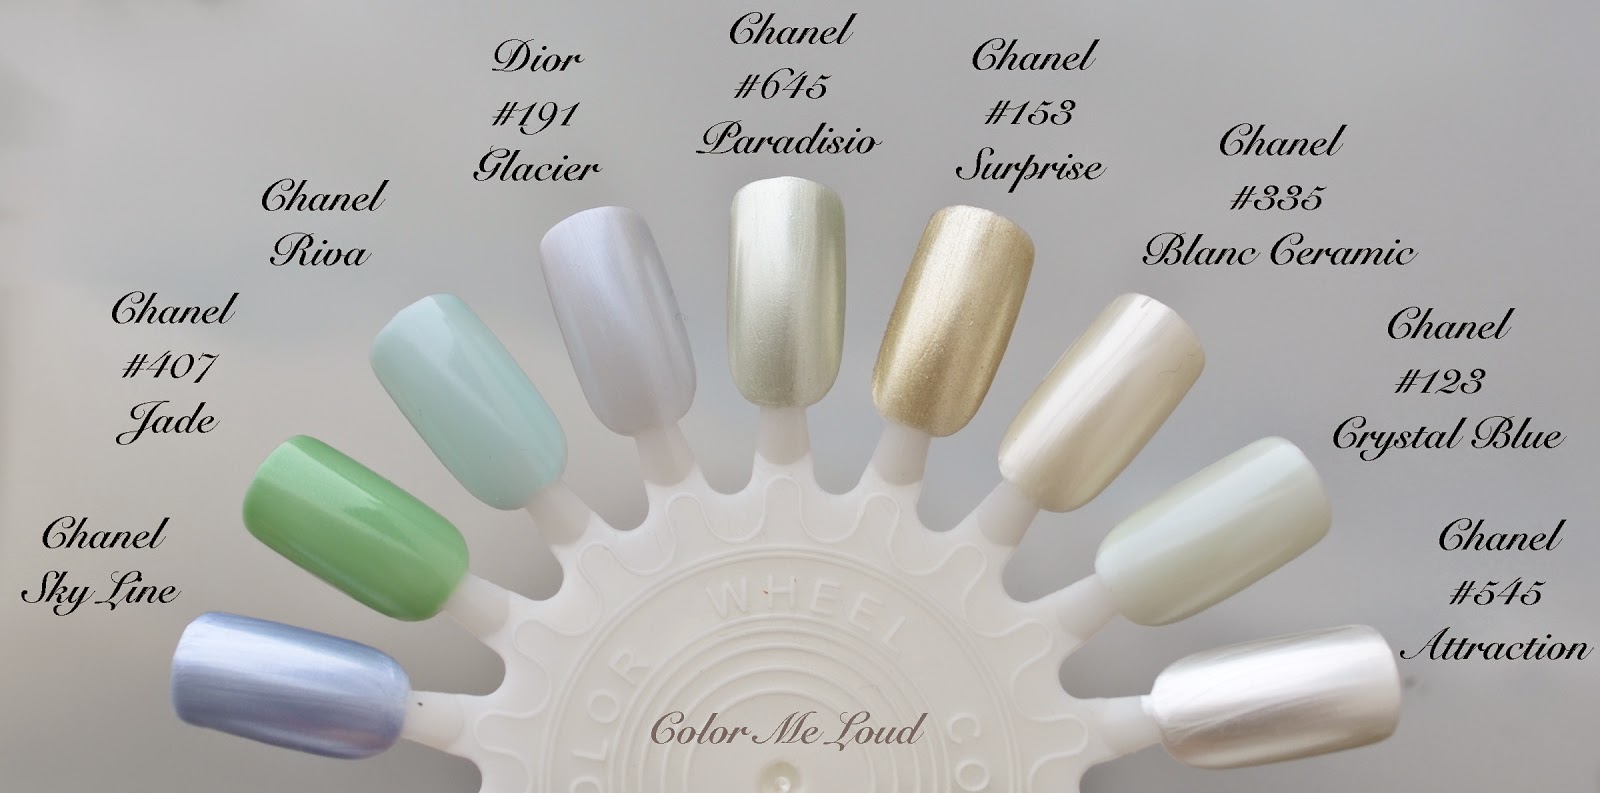 æstetisk Produktion malt Chanel Le Vernis #641 Tenderly, #643 Desirio and #645 Paradisio for Rêverie  Parisienne Spring 2015 Collection, Swatch, Review & Comparison | Color Me  Loud